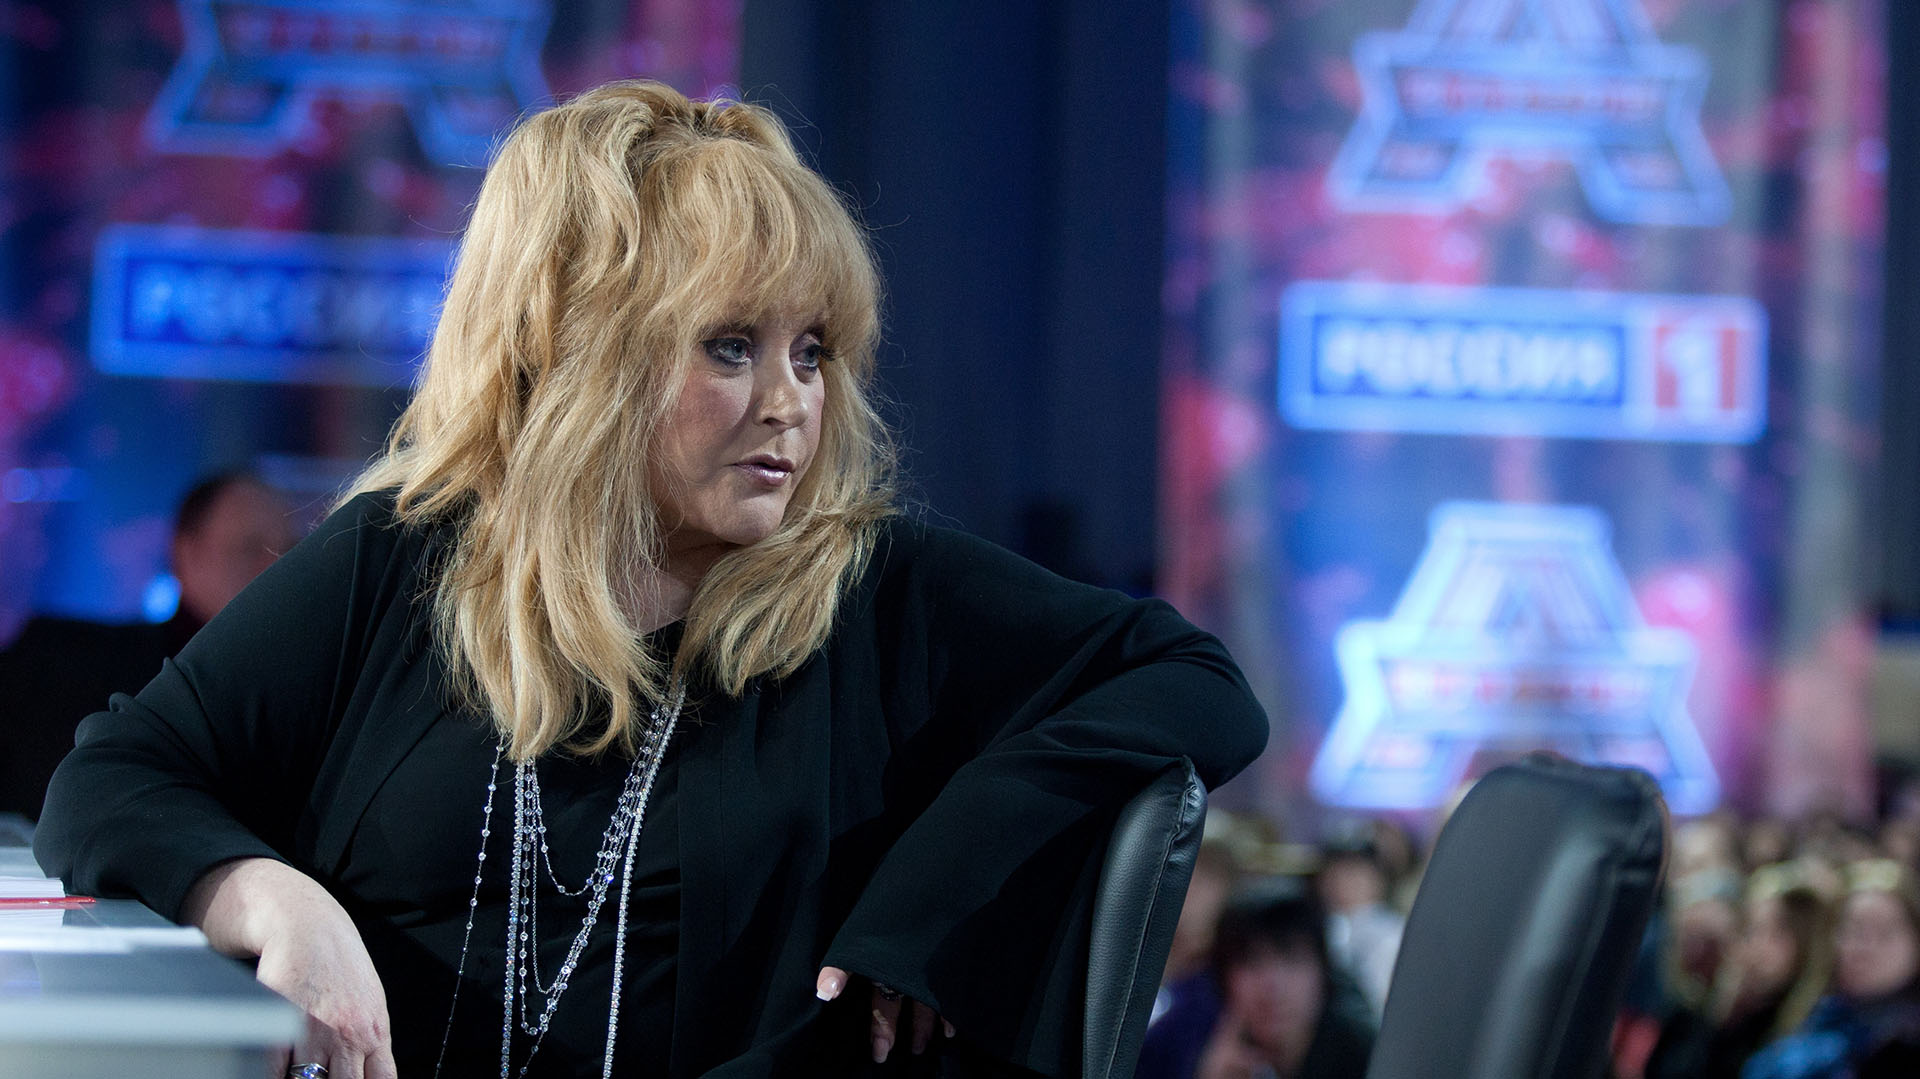 MOSCOW, RUSSIA - MARCH 22:  Russian singer Alla Pugacheva looks on during a casting session for "the Factor A" a new musical television show on March 22, 2011 in Moscow, Russia.  (Photo by Anton Belitsky/Epsilon/Getty Images)